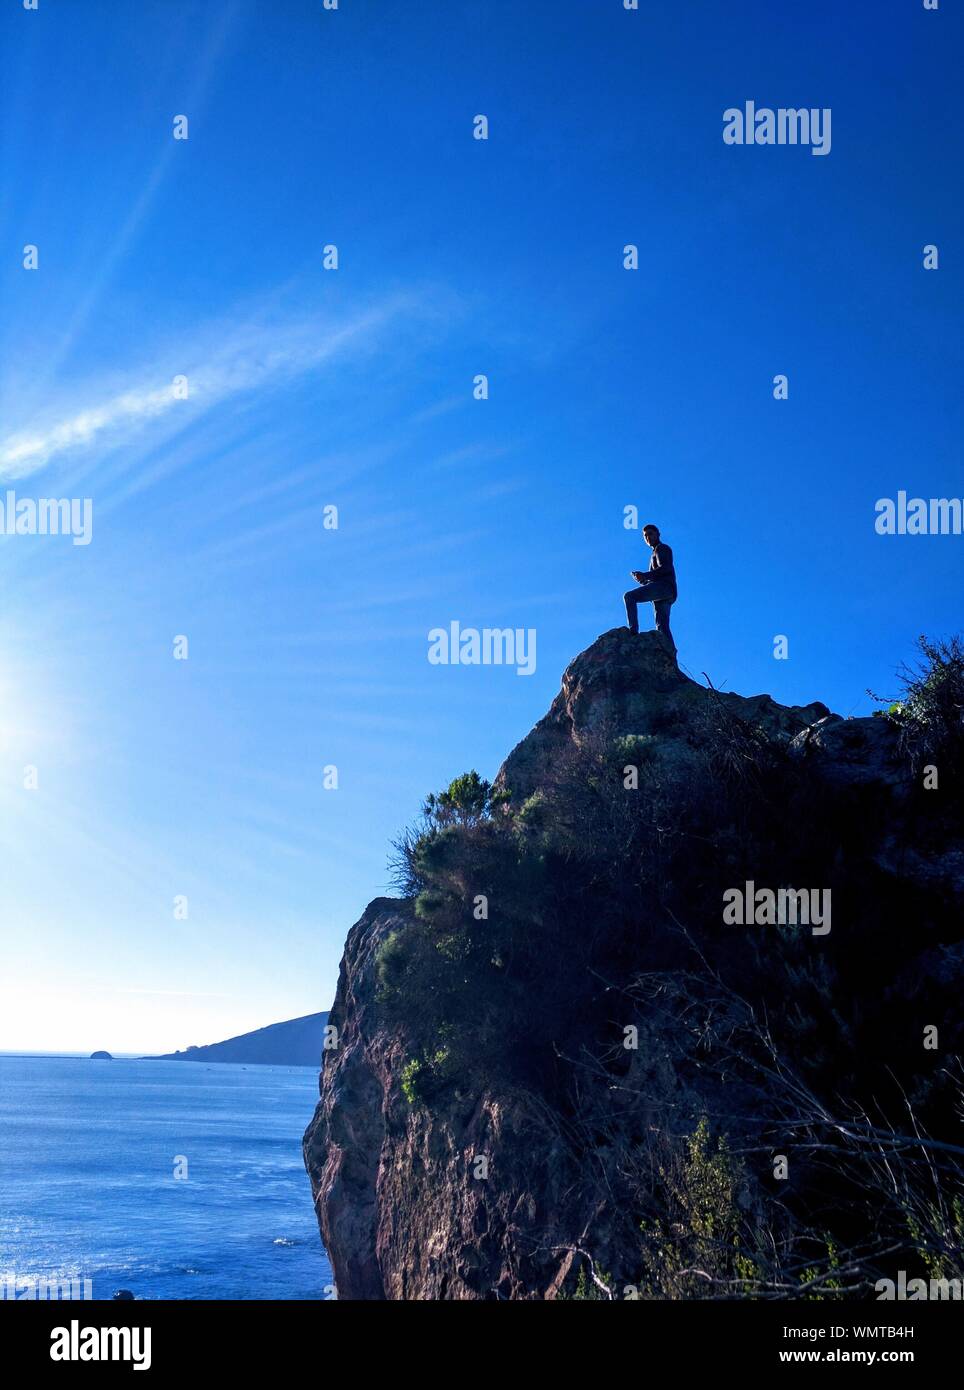 Man Standing On Beach Cliff Against Blue Sky Stock Photo